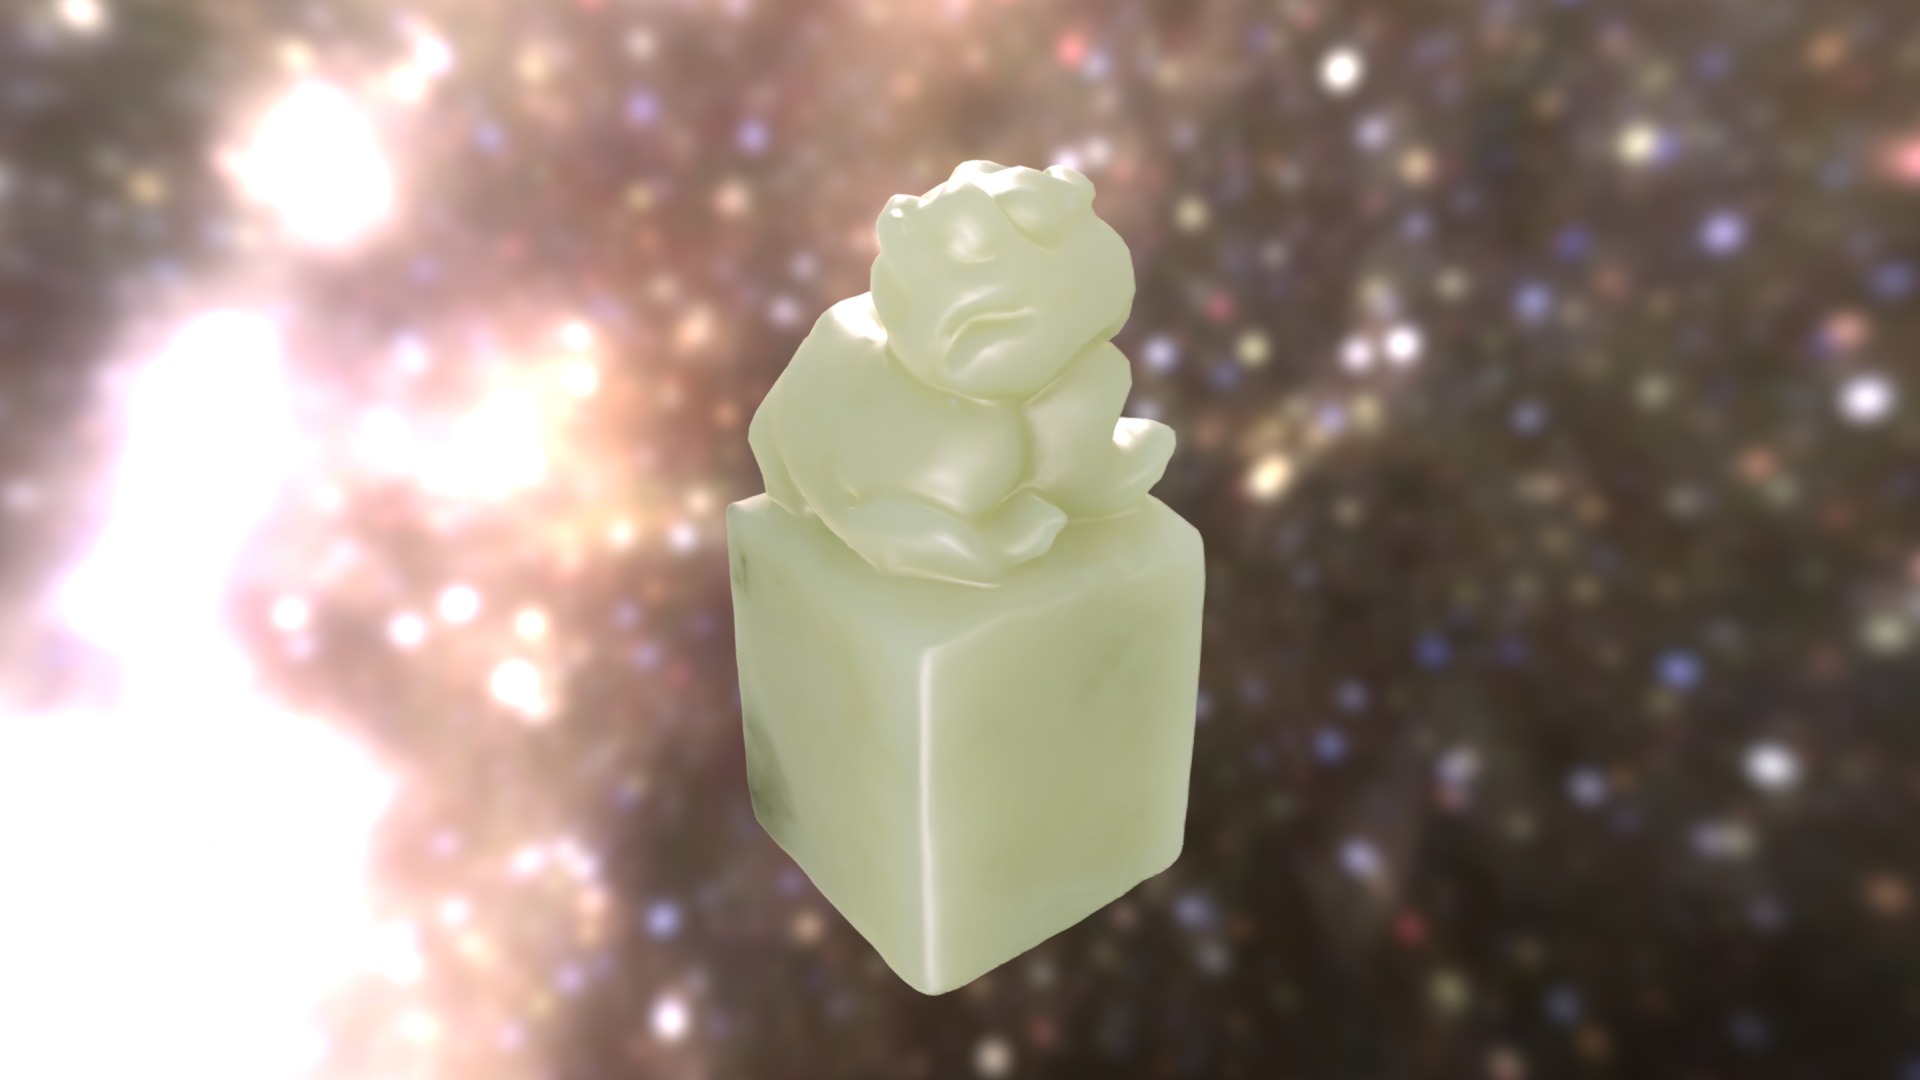 3D model Jade Stamp — Royal Dragon - This is a 3D model of the Jade Stamp --- Royal Dragon. The 3D model is about a green and white object.